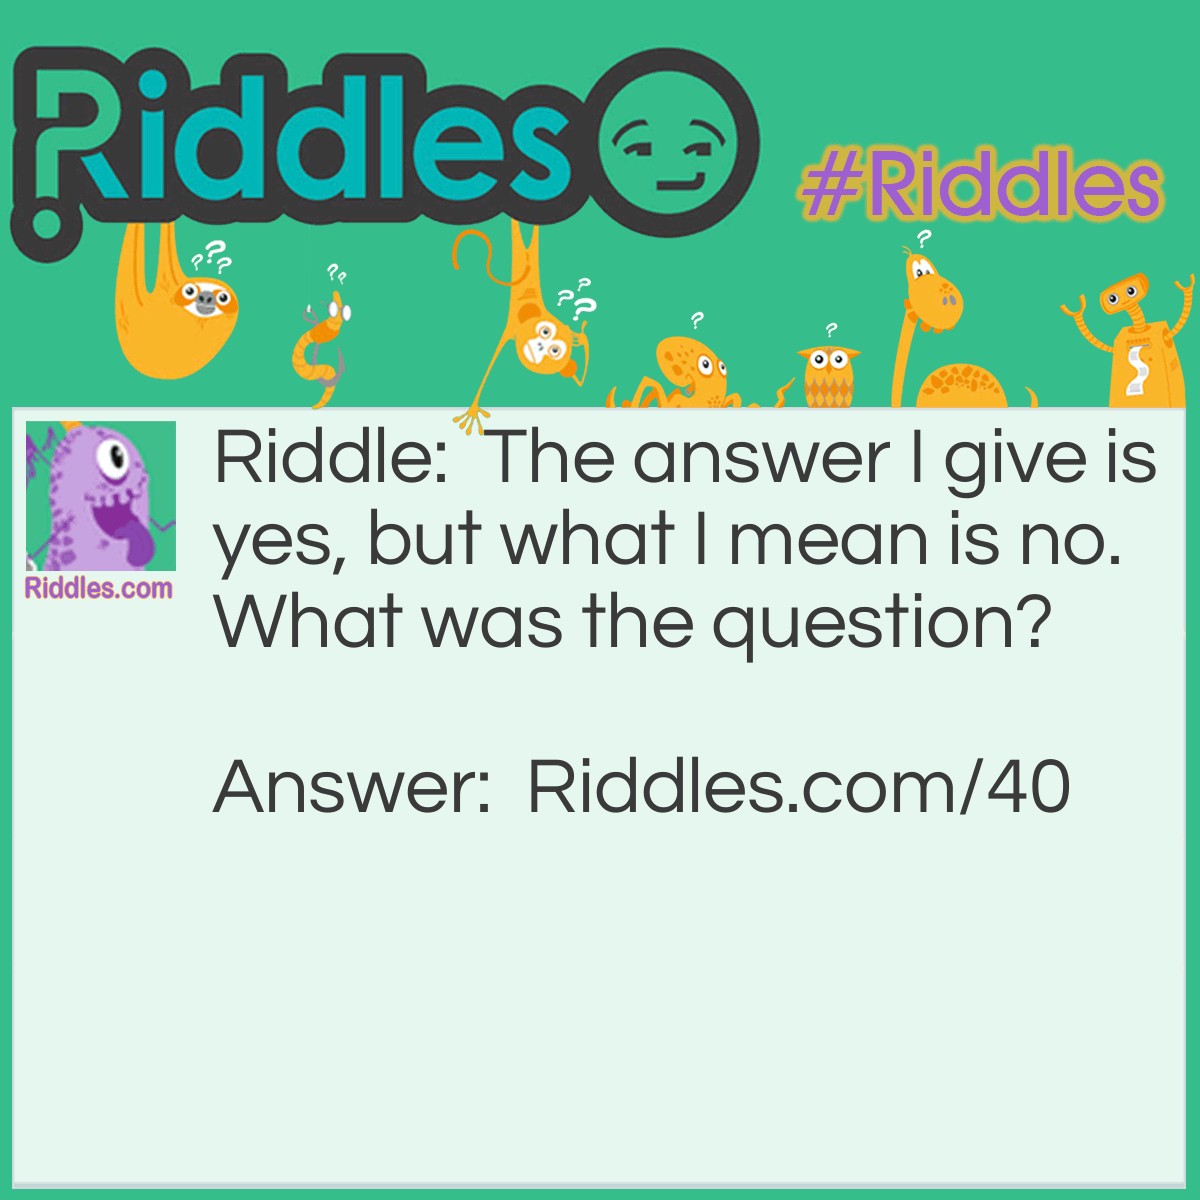 Riddle: The answer I give is yes, but what I mean is no. What was the question? Answer: Do you mind?